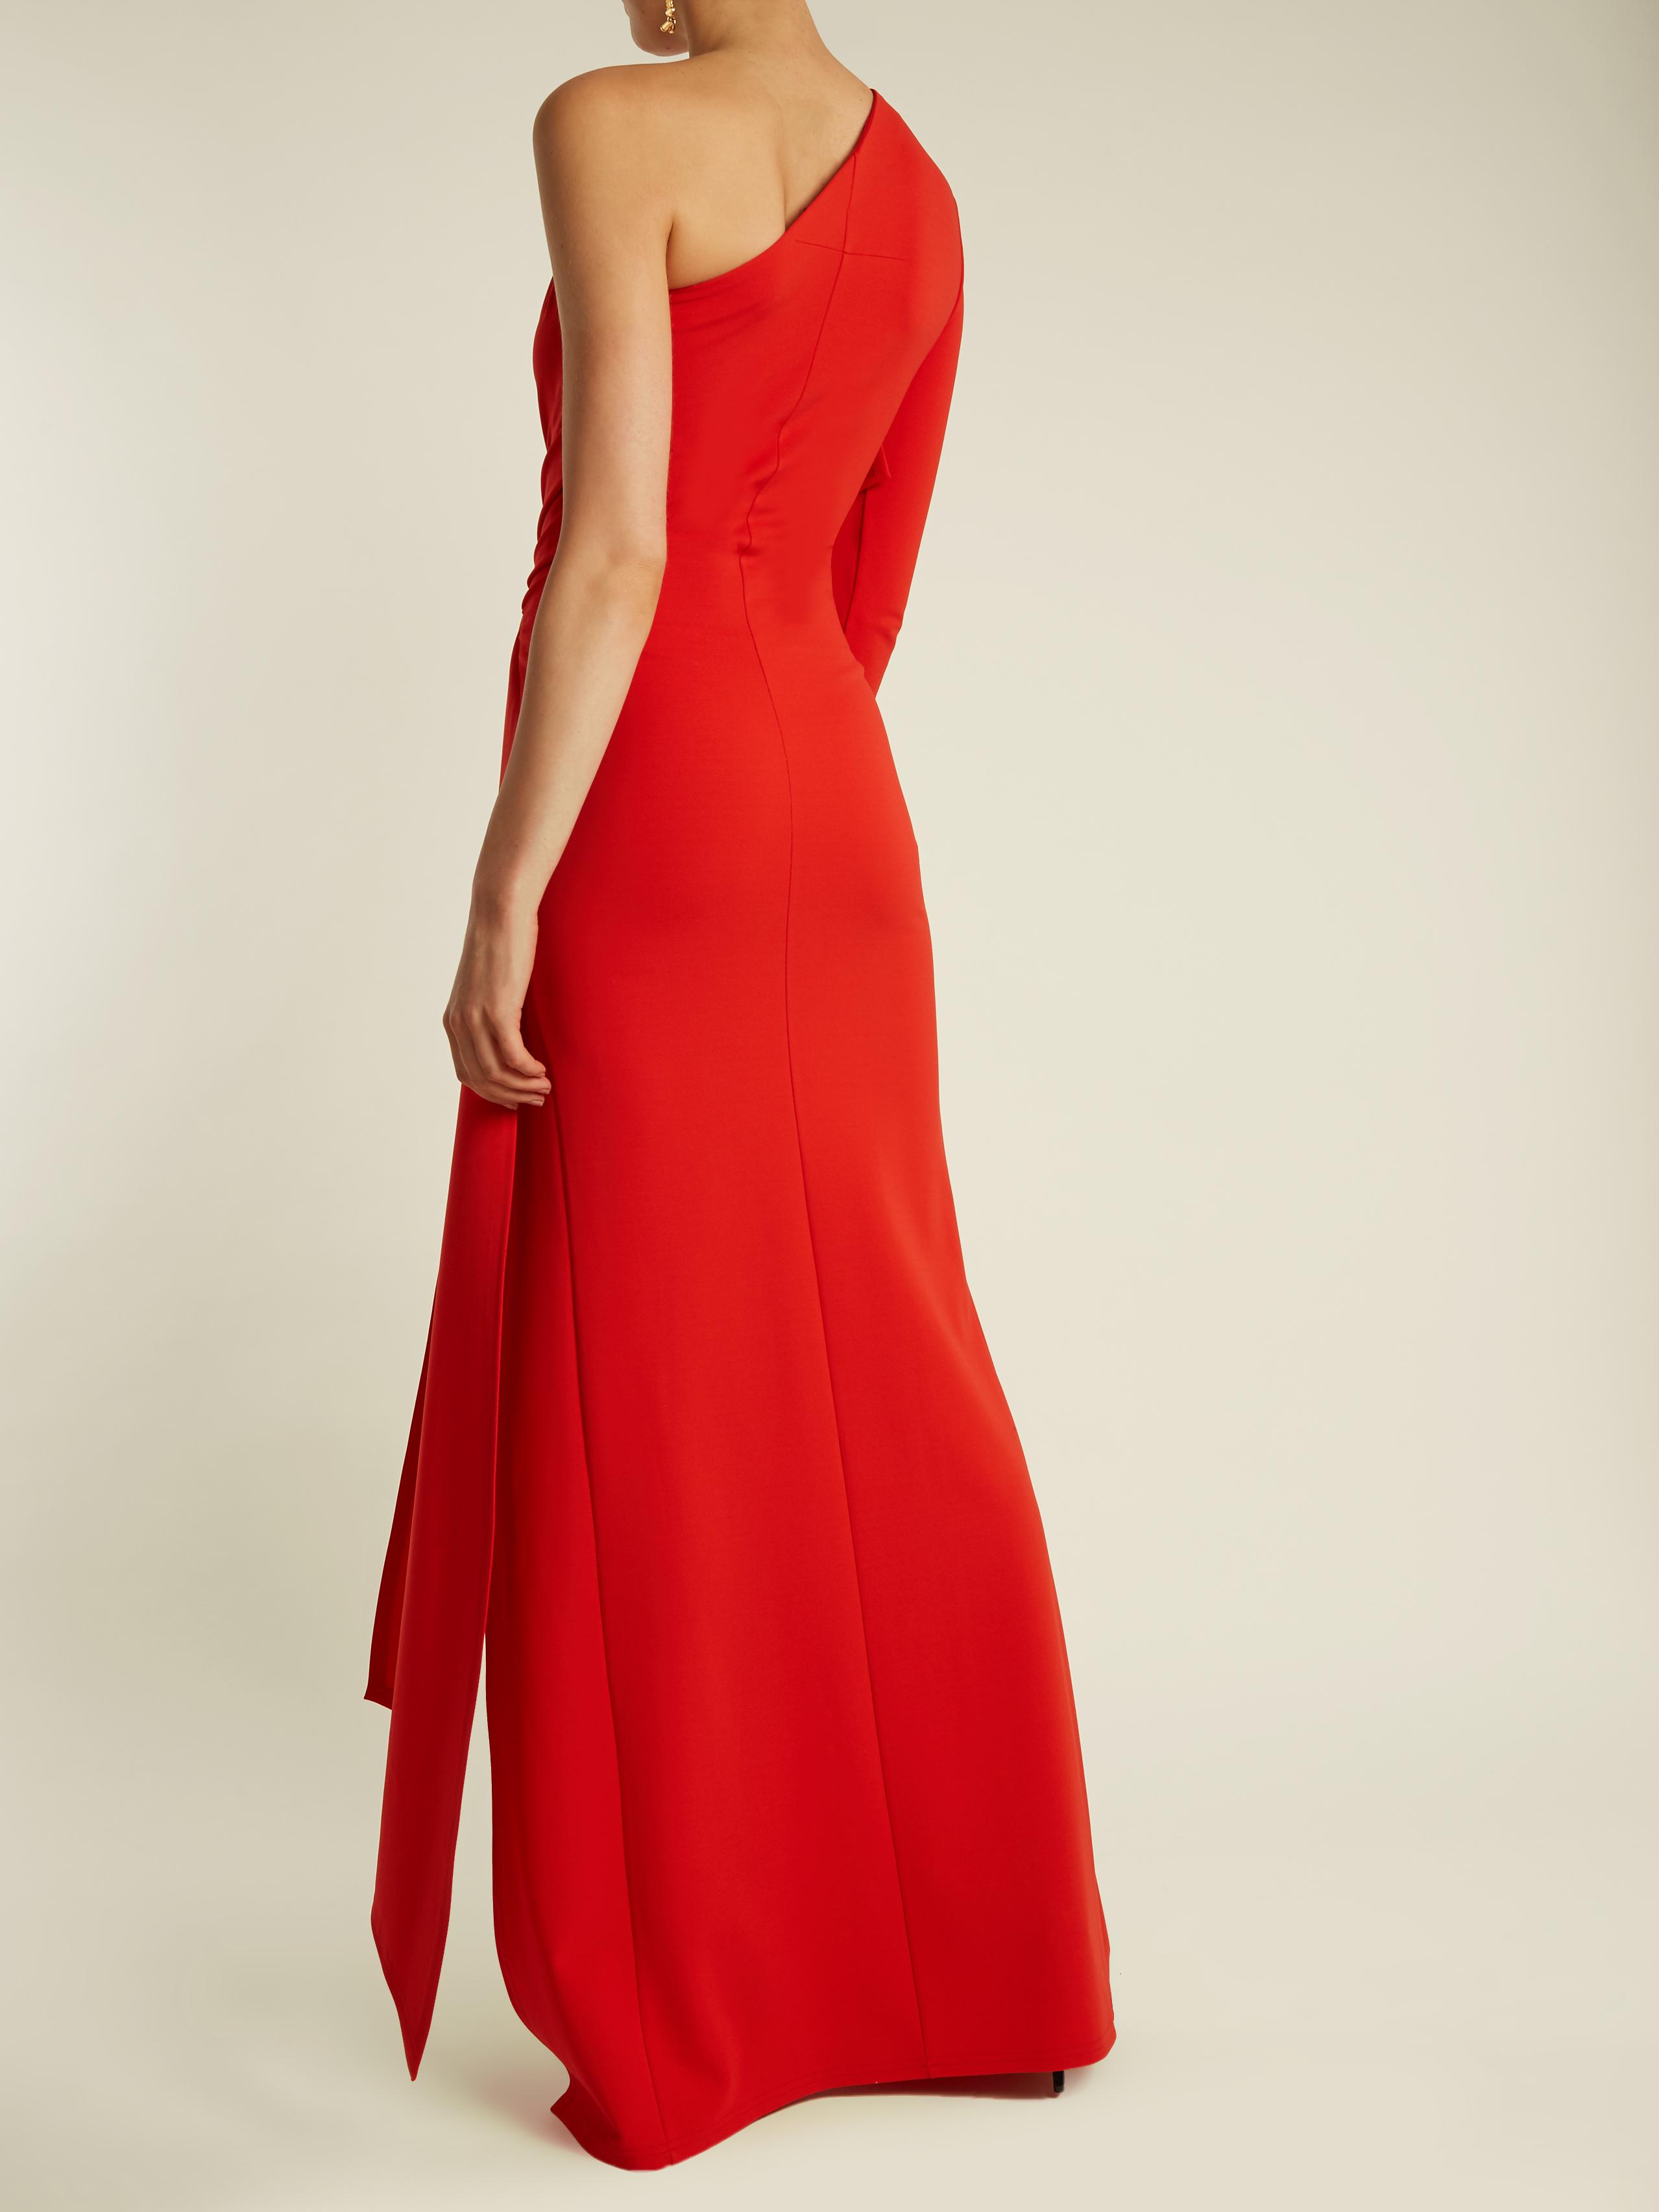 Givenchy Synthetic One-shoulder Draped-panel Cady Gown in Red - Lyst